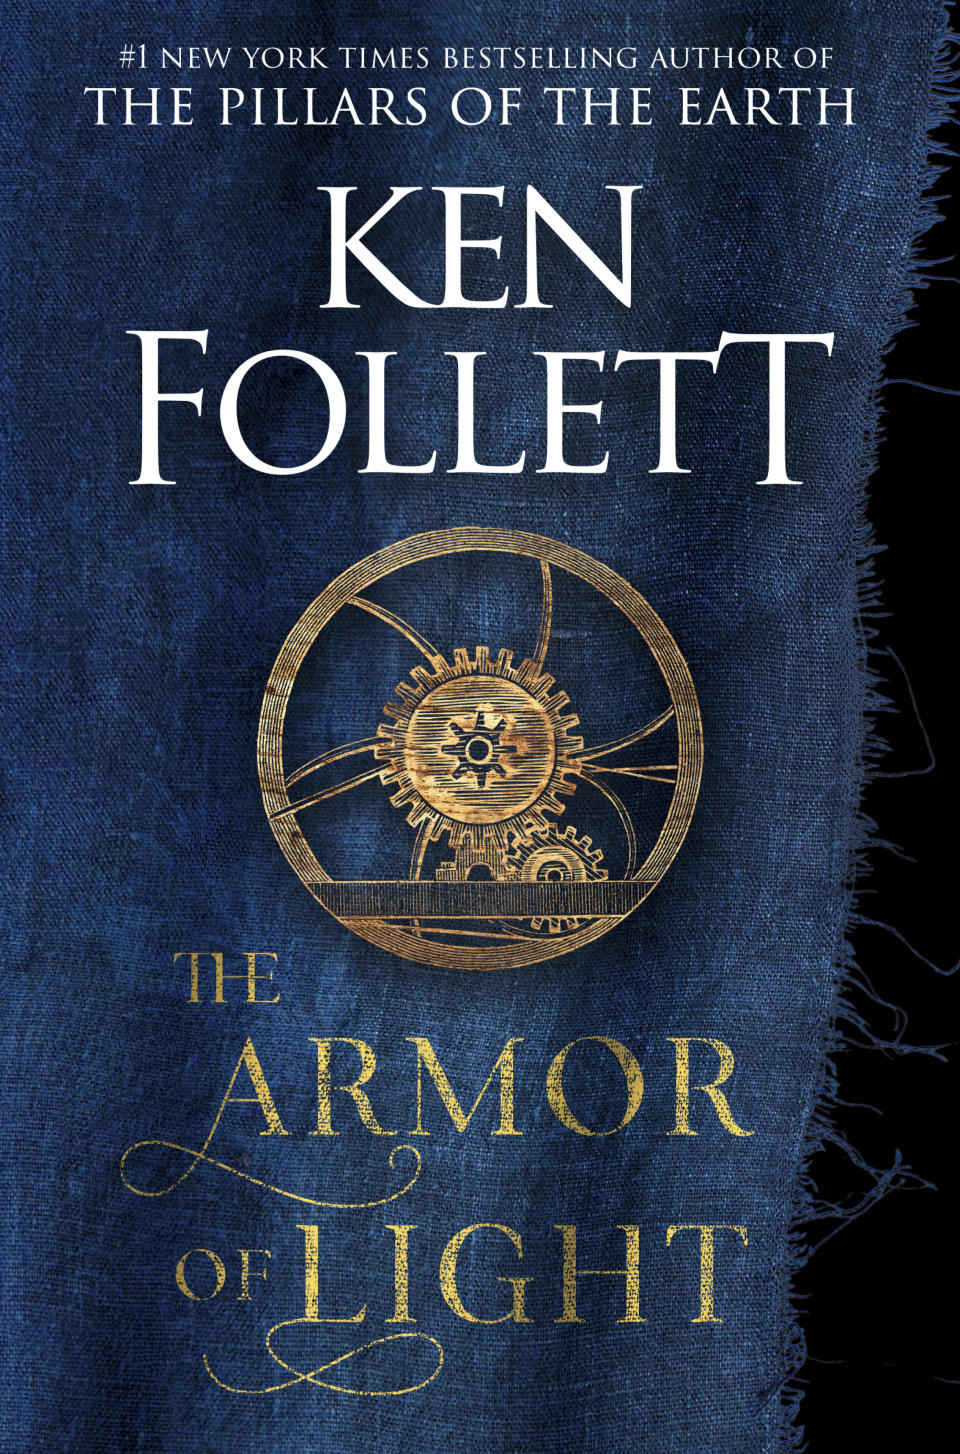 This image released by Viking shows "The Armor of Light" by Ken Follett. (Viking via AP)